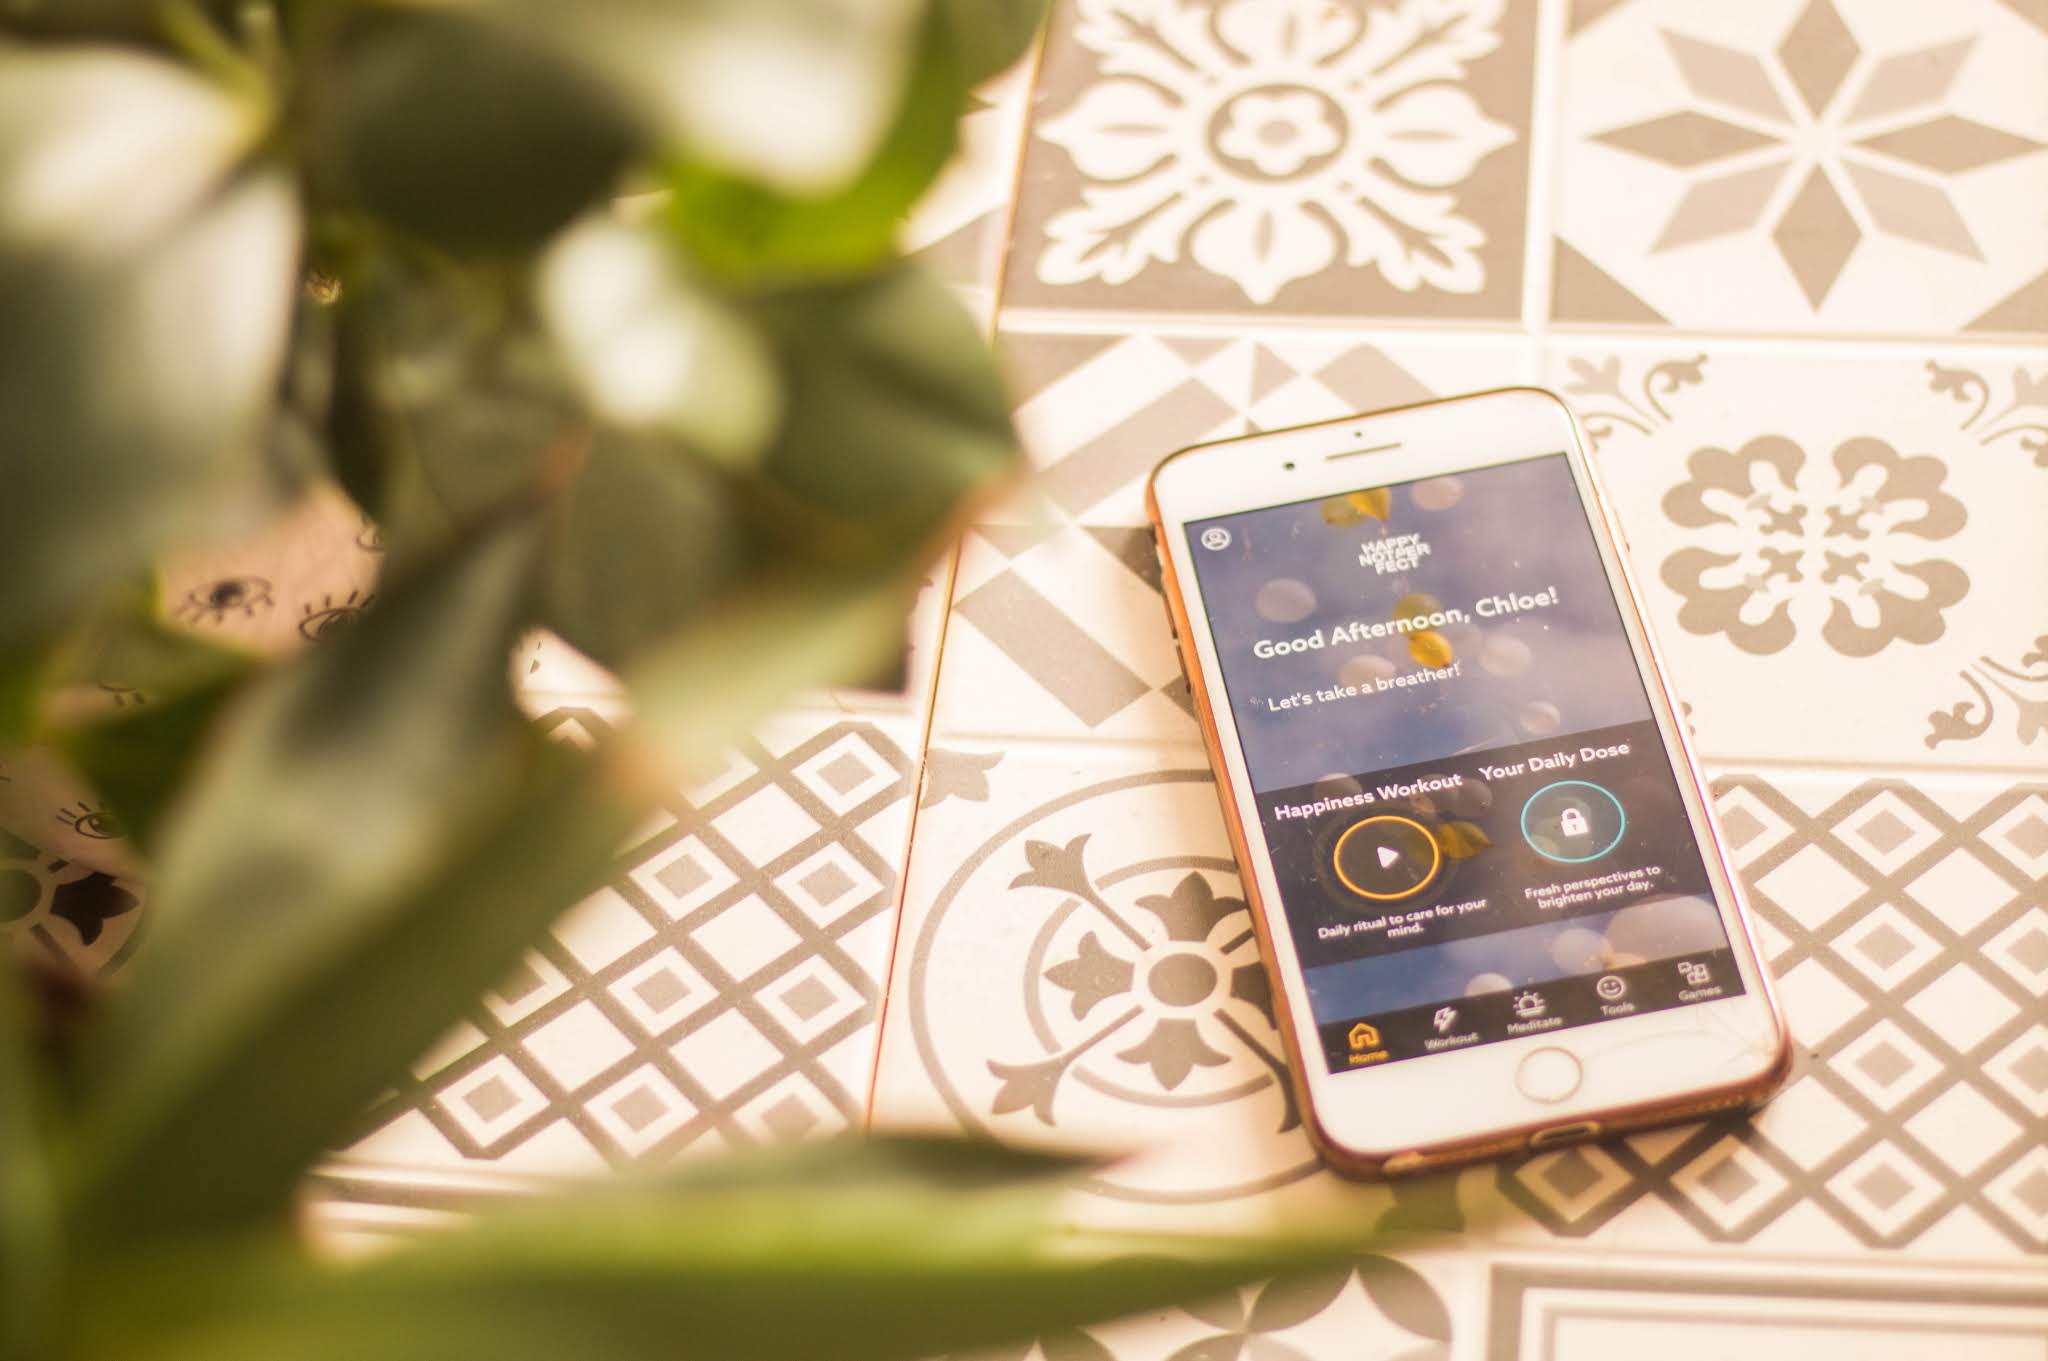 Meditation App Happy not perfect on Iphone - review